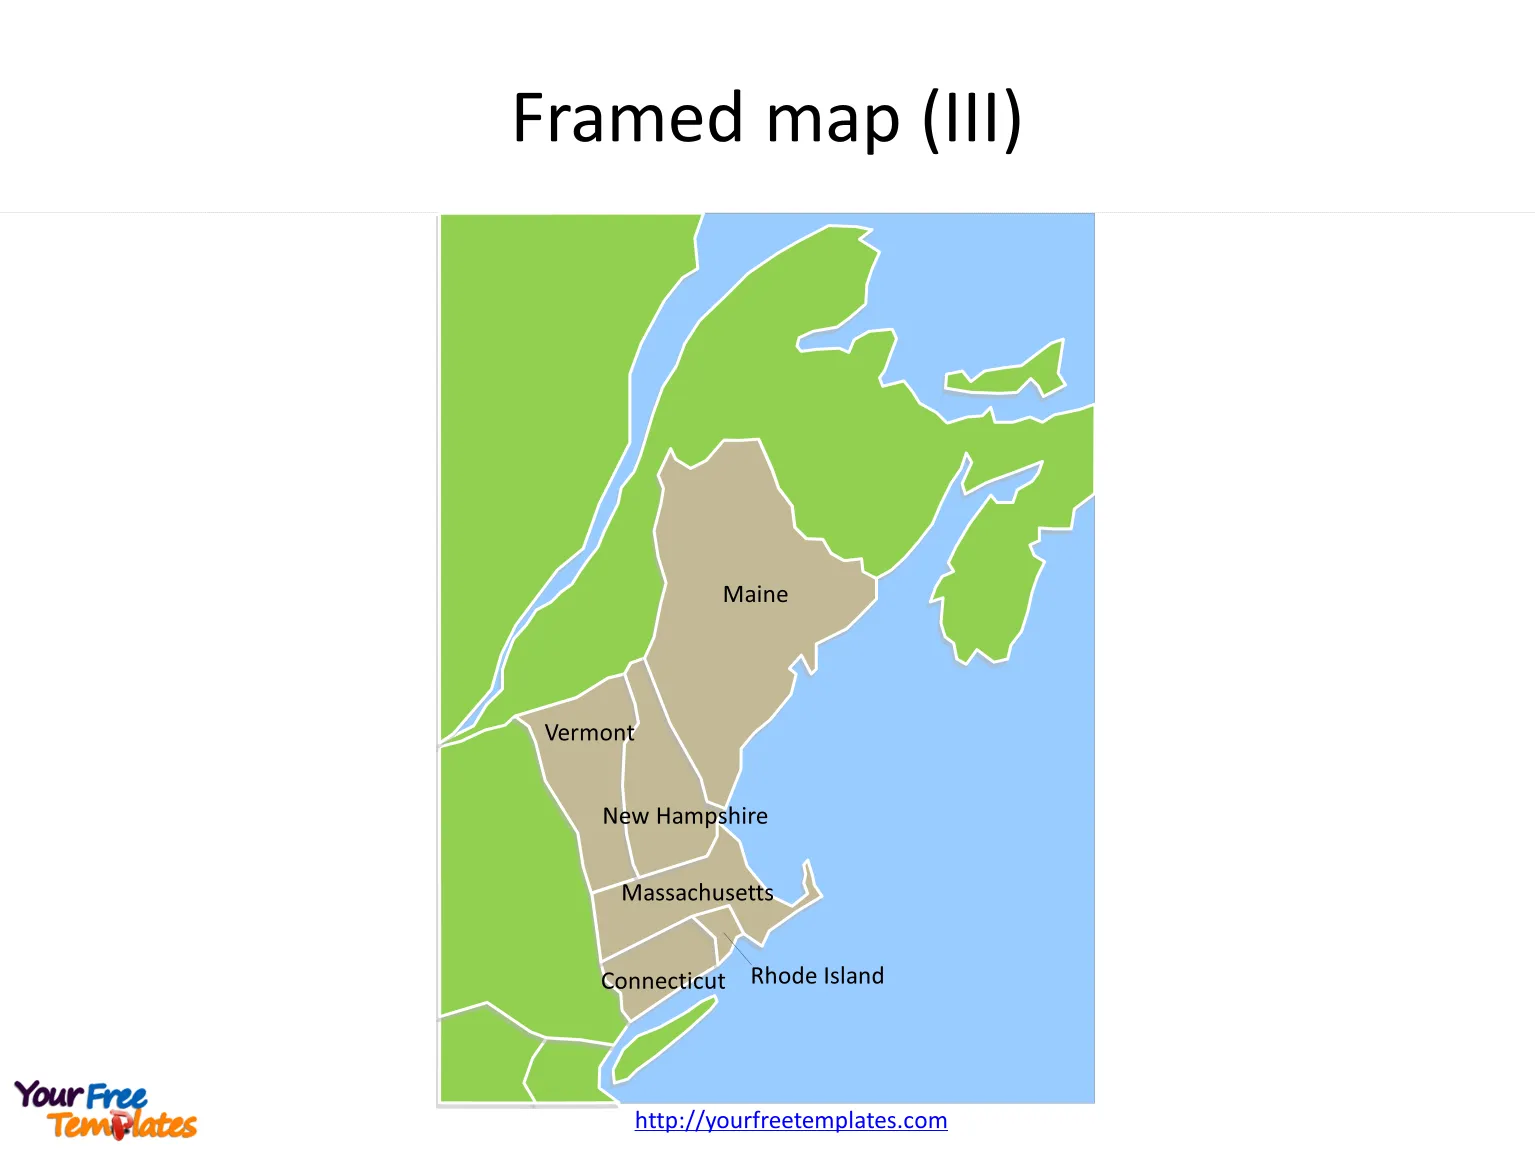 Framed New England maps and neighboring States on the US map PowerPoint templates